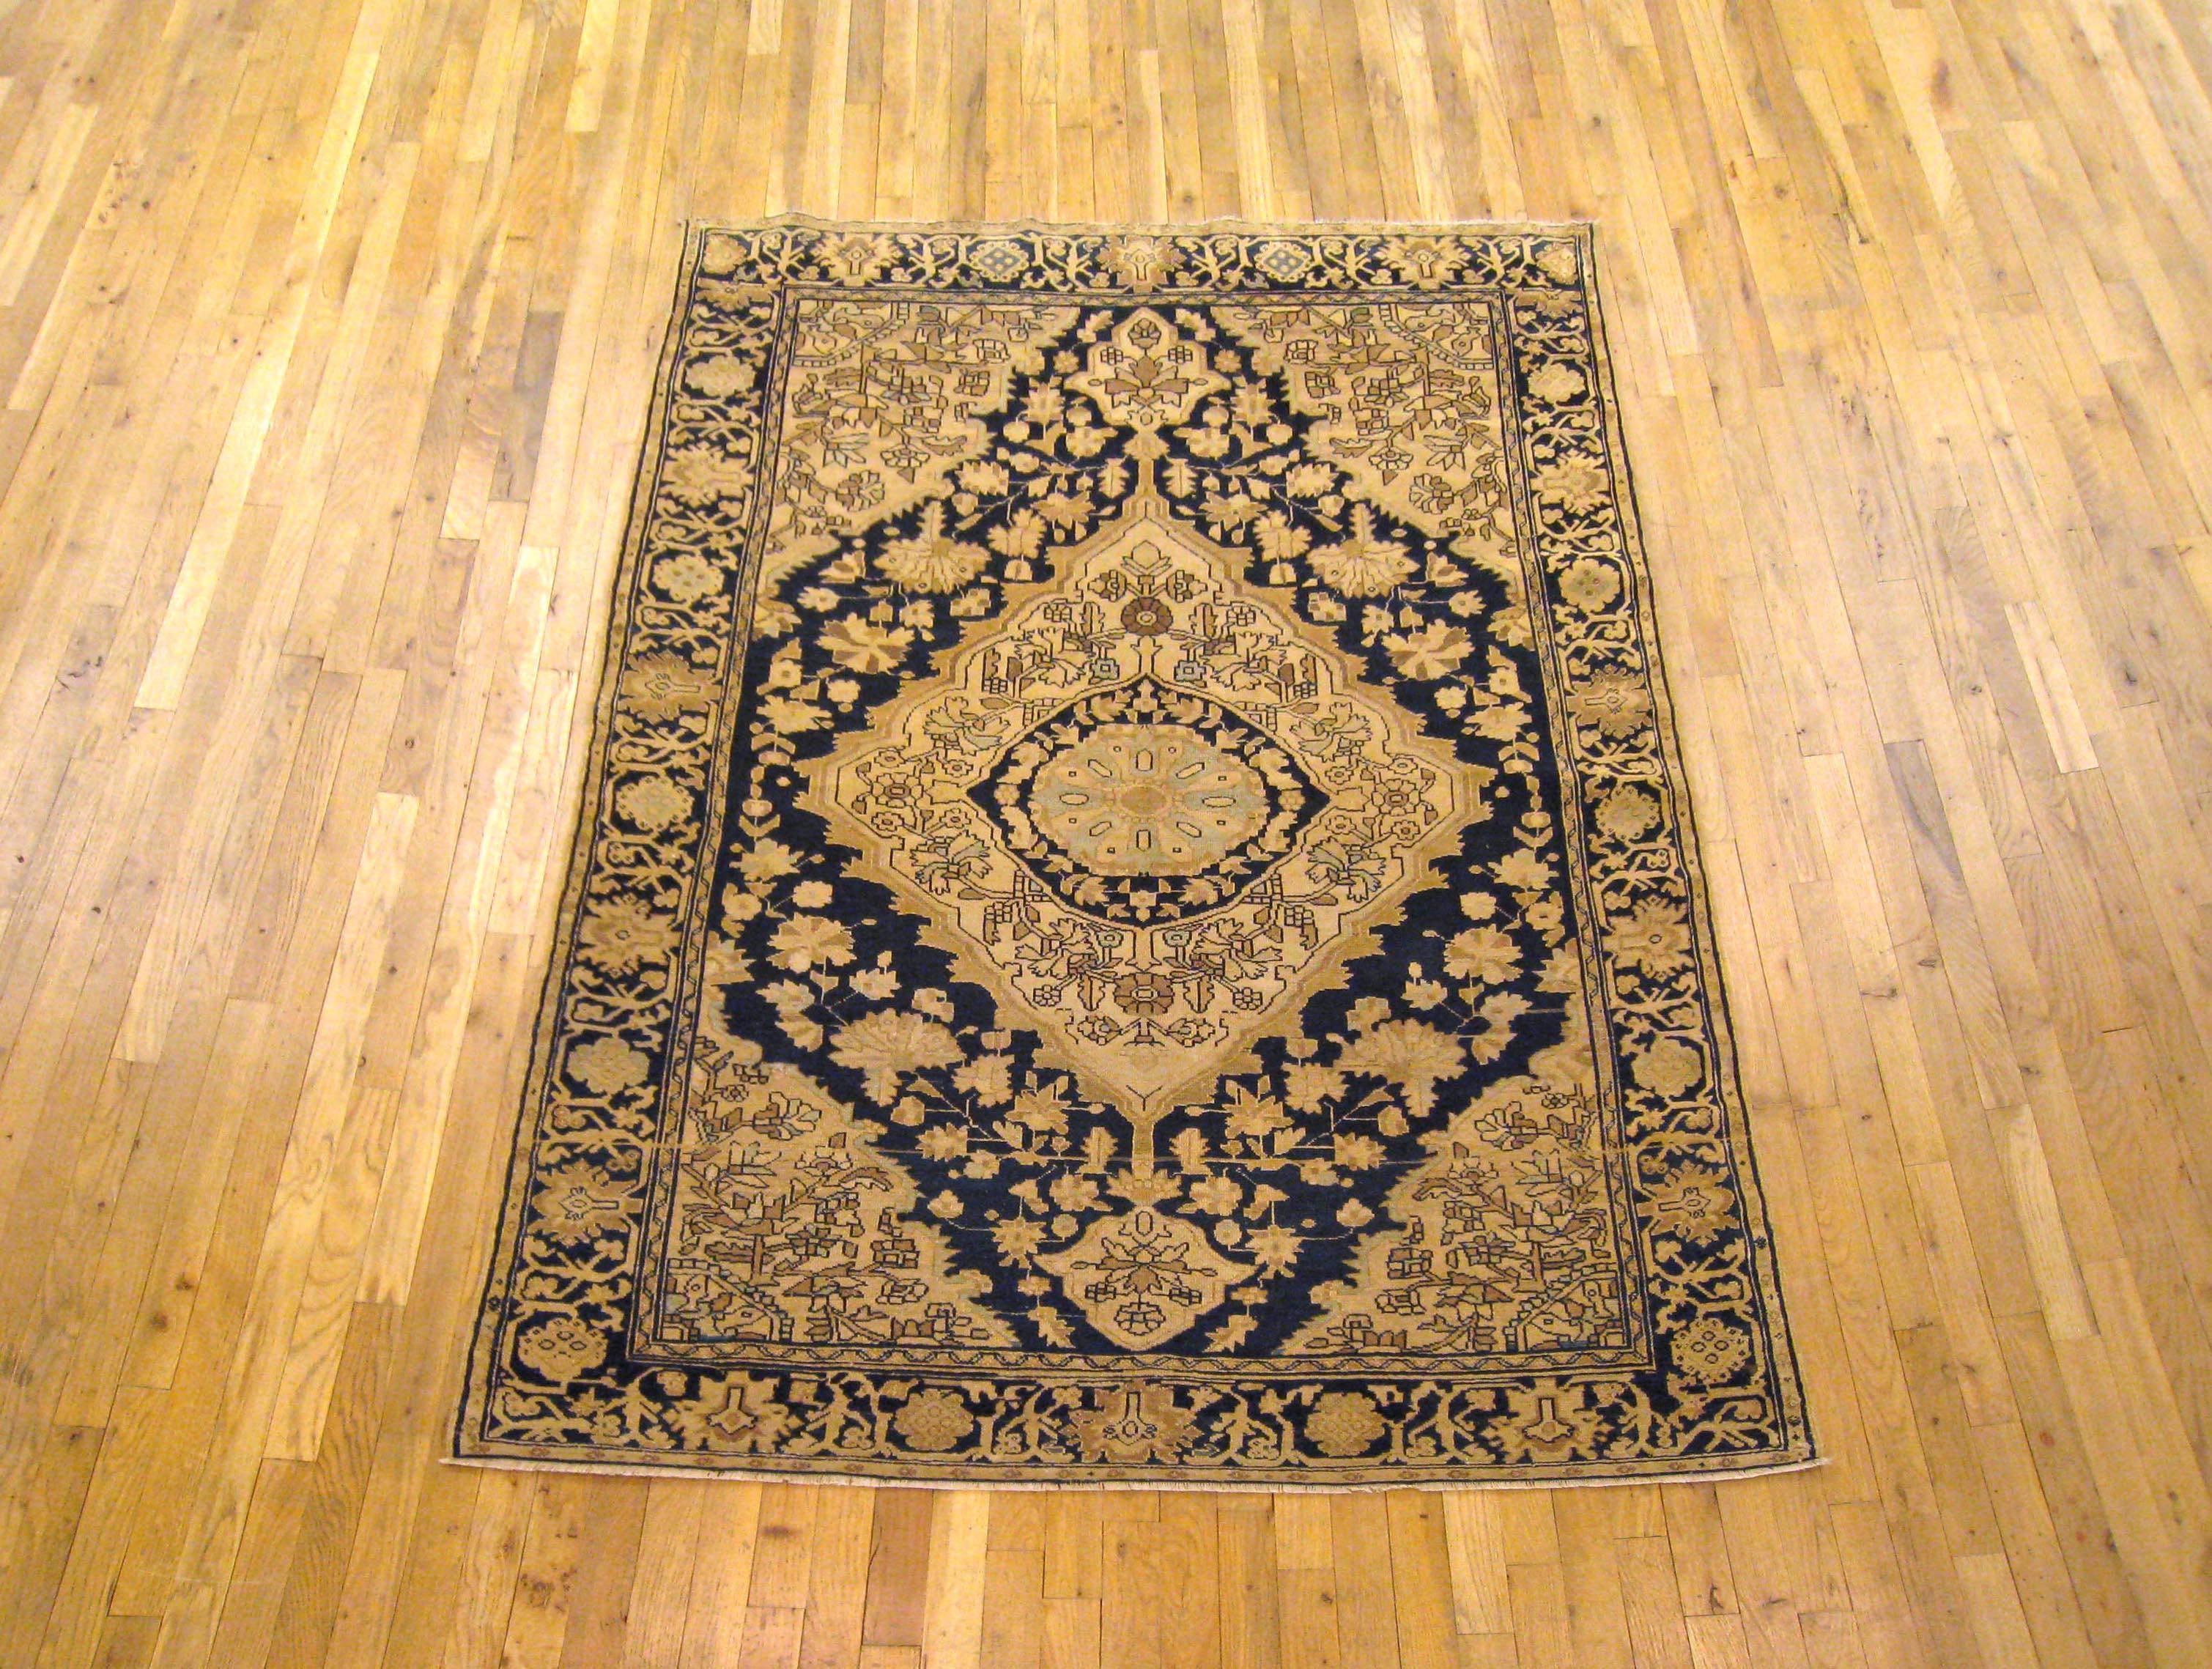 Antique Persian Malayer Oriental Rug in Small Size

An antique Persian Malayer oriental rug, circa 1900. Size 6'6